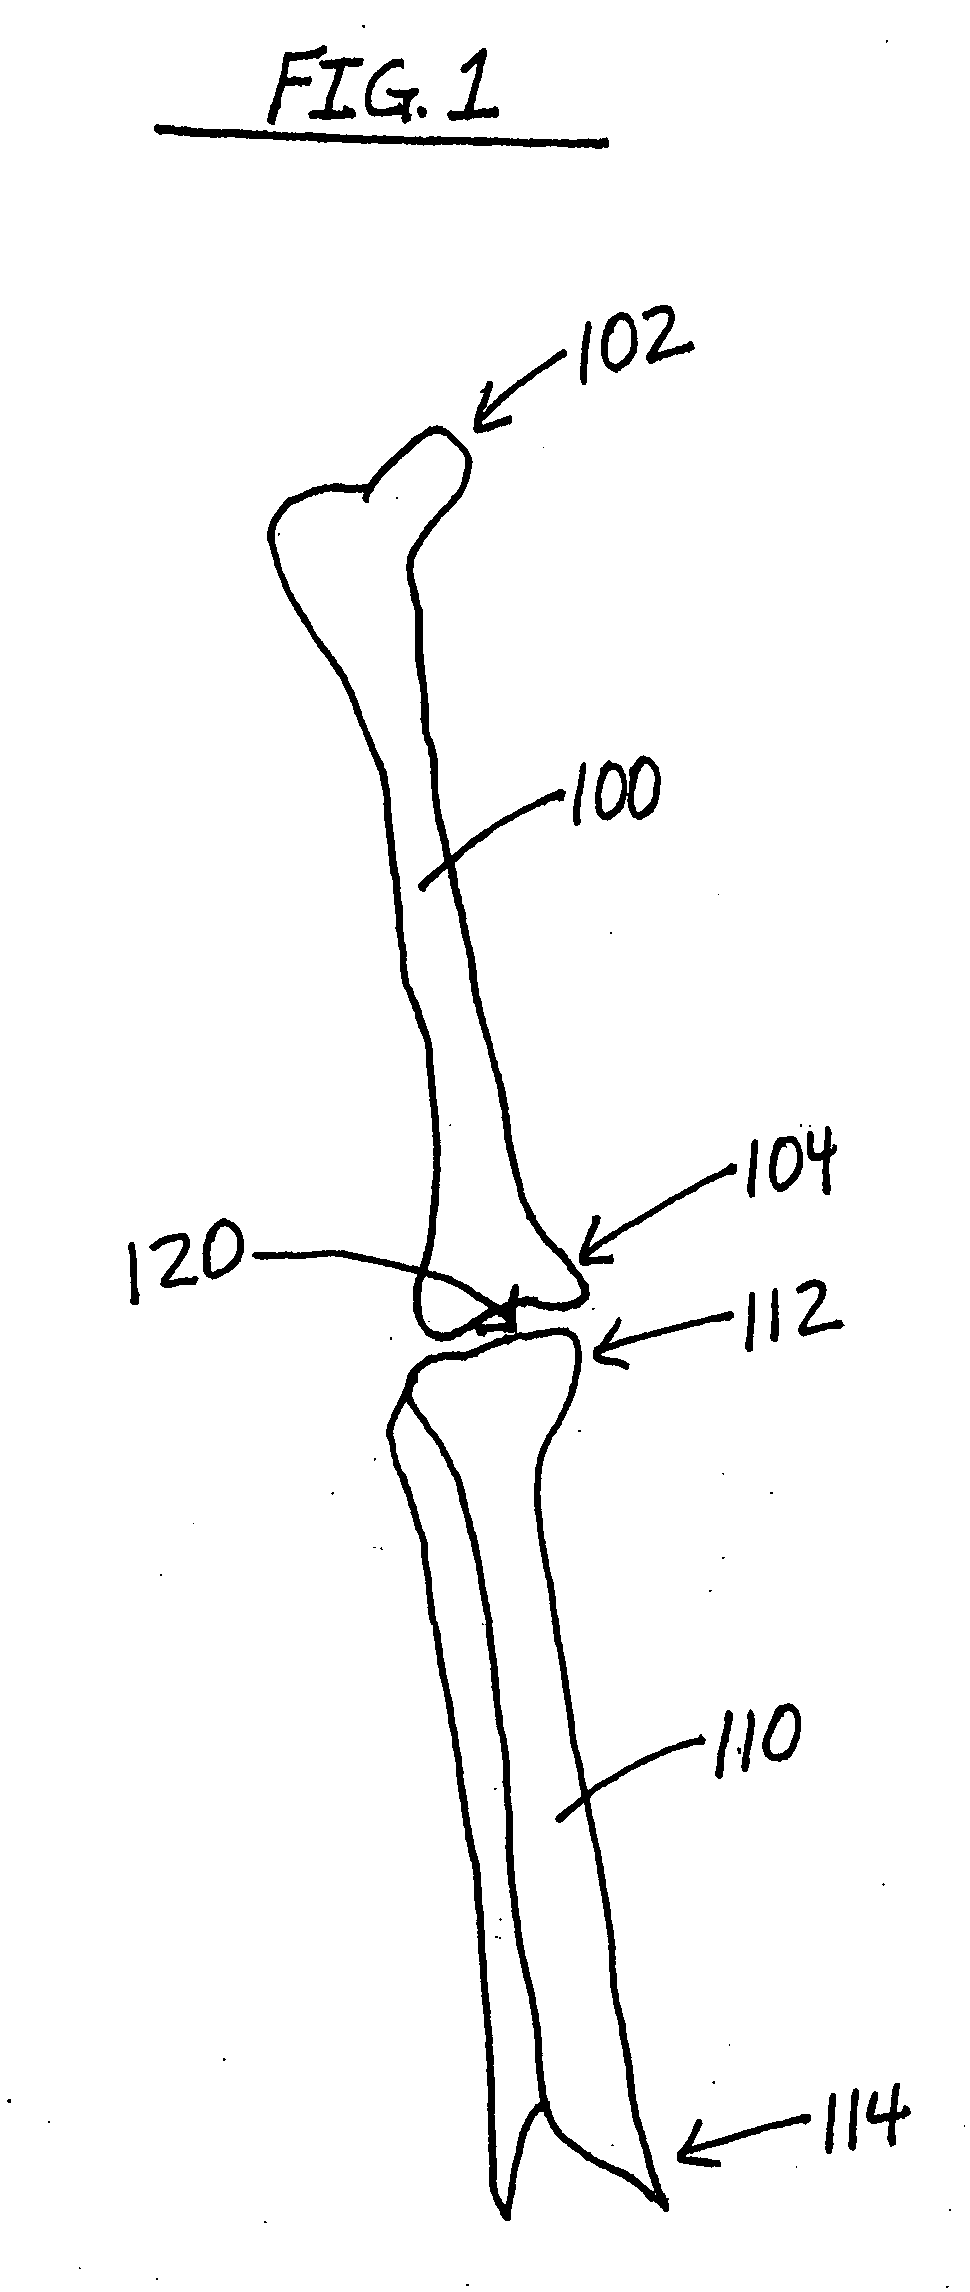 Arthroplasty devices and related methods